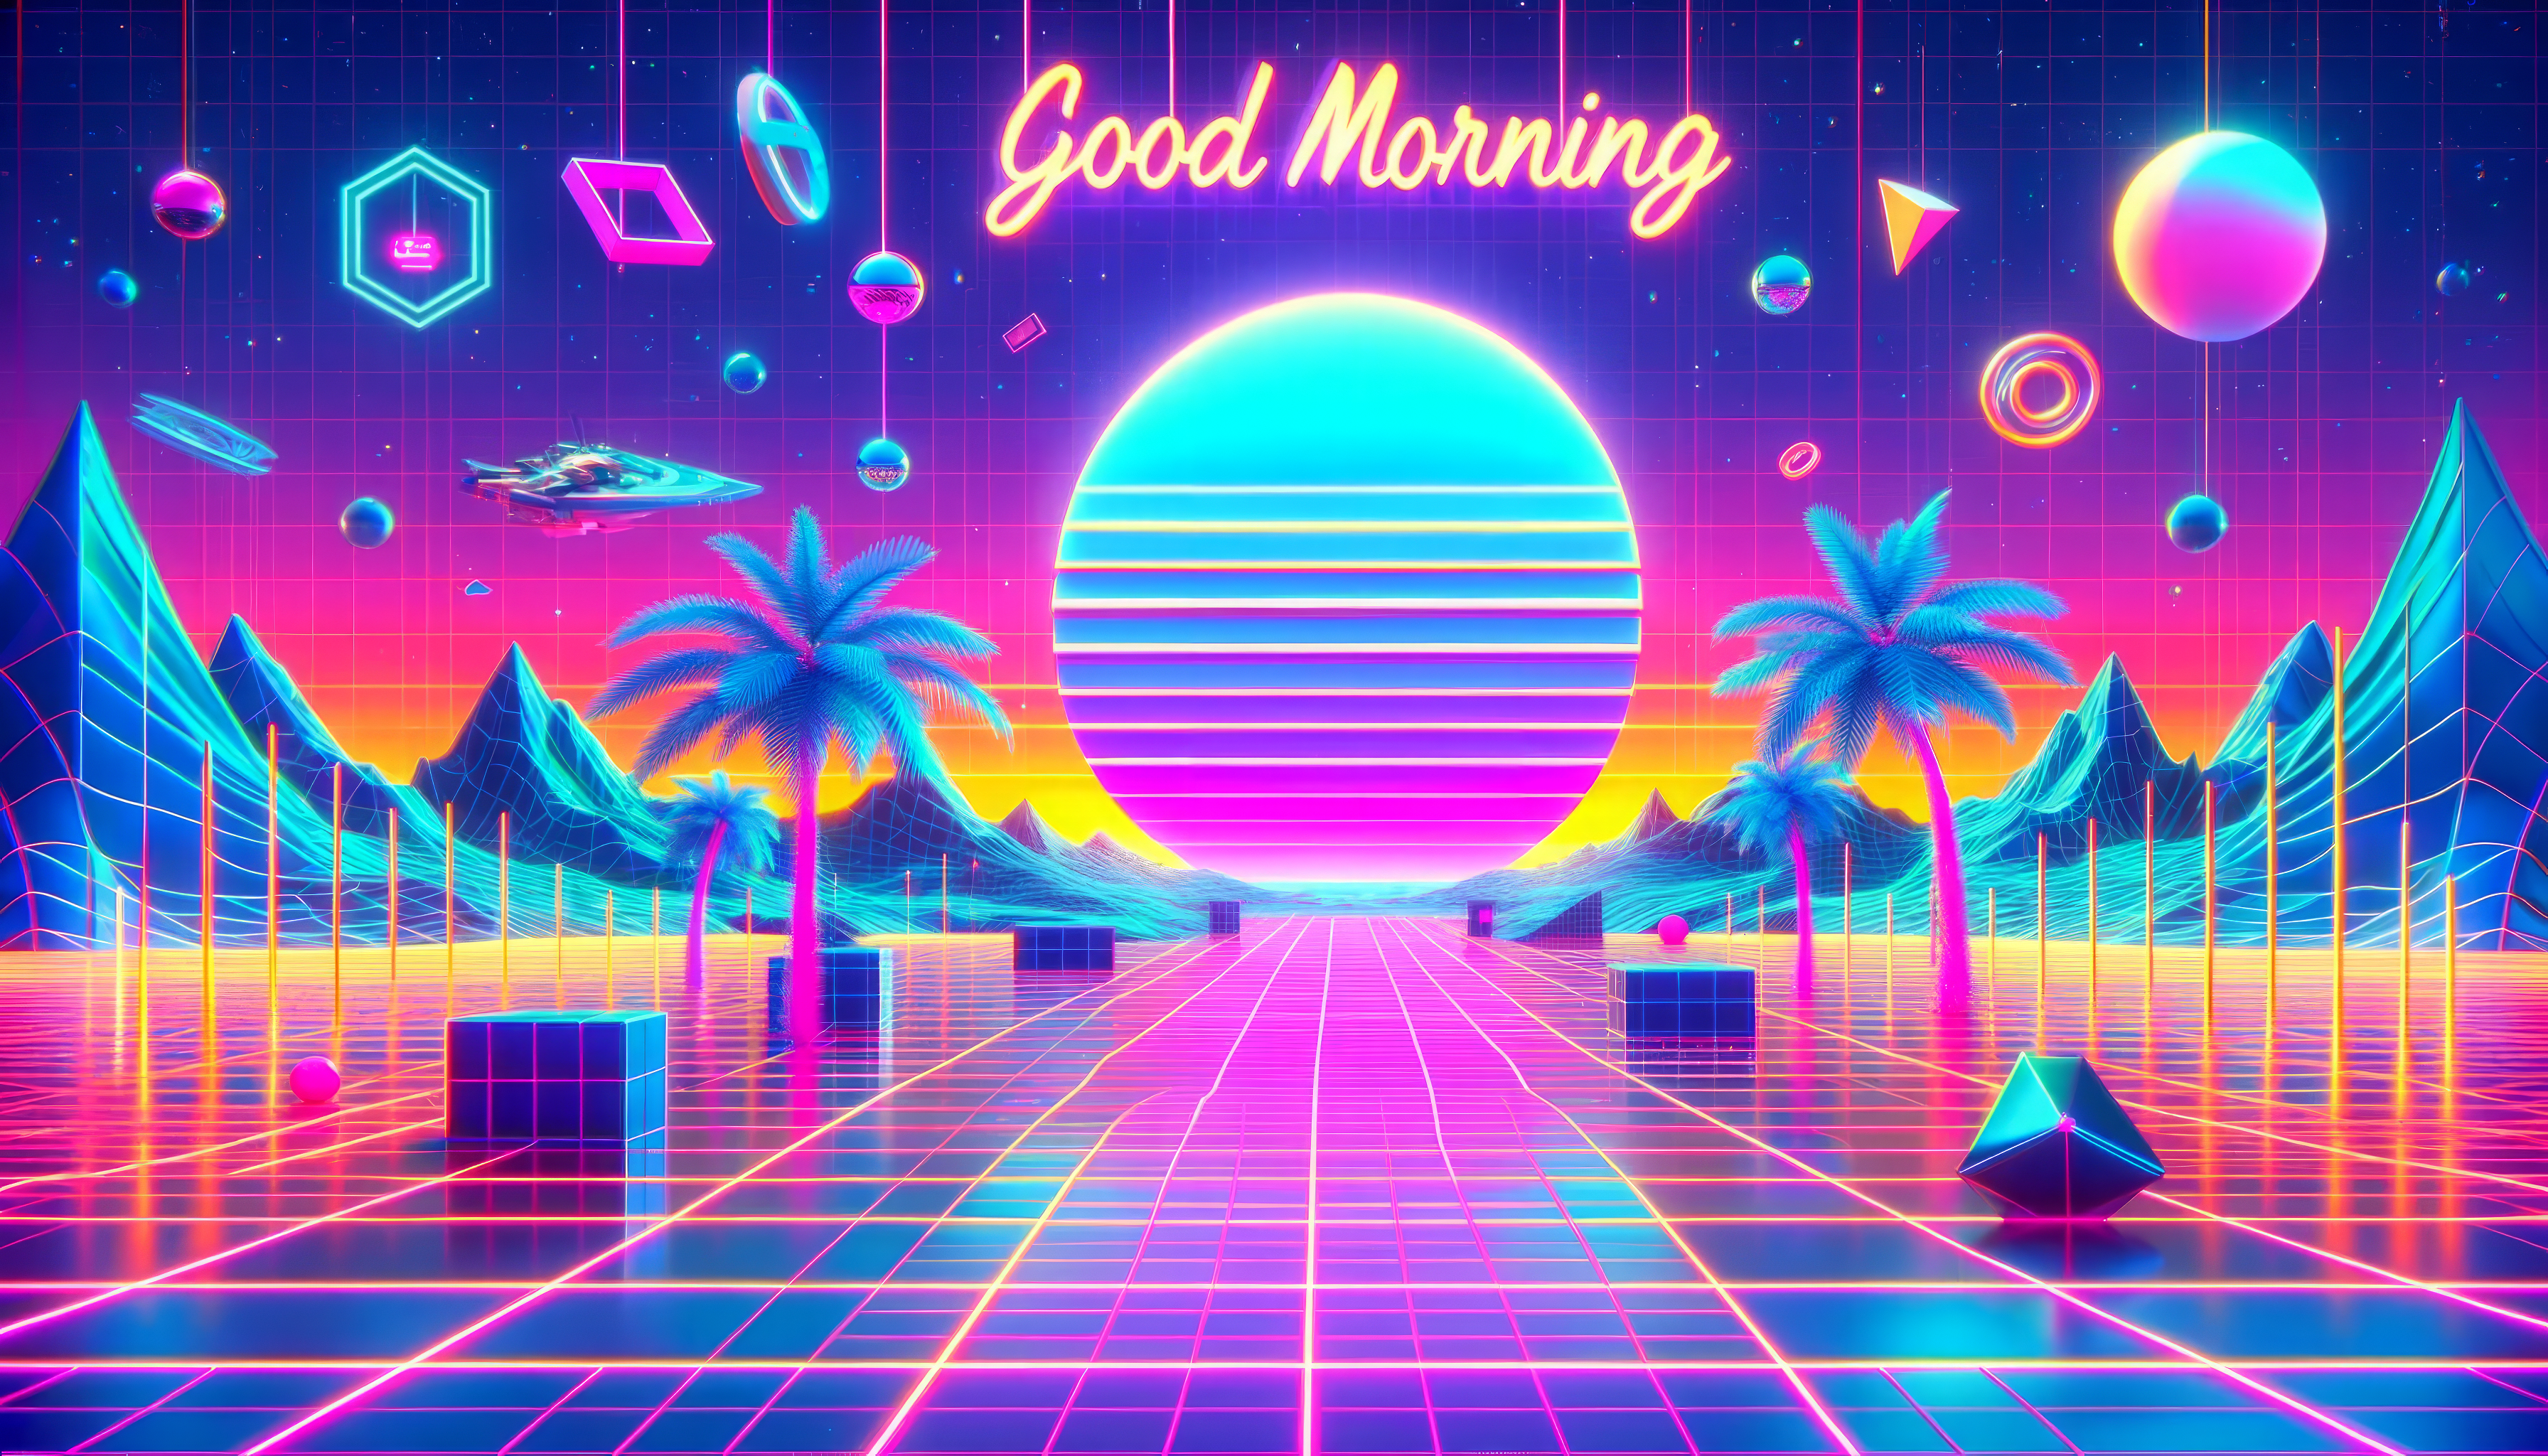 Vibrant retro-futuristic Good Morning wallpaper with a neon sunrise, palm trees, and geometric shapes. Perfect for a HD desktop background with a nostalgic 80s vibe.